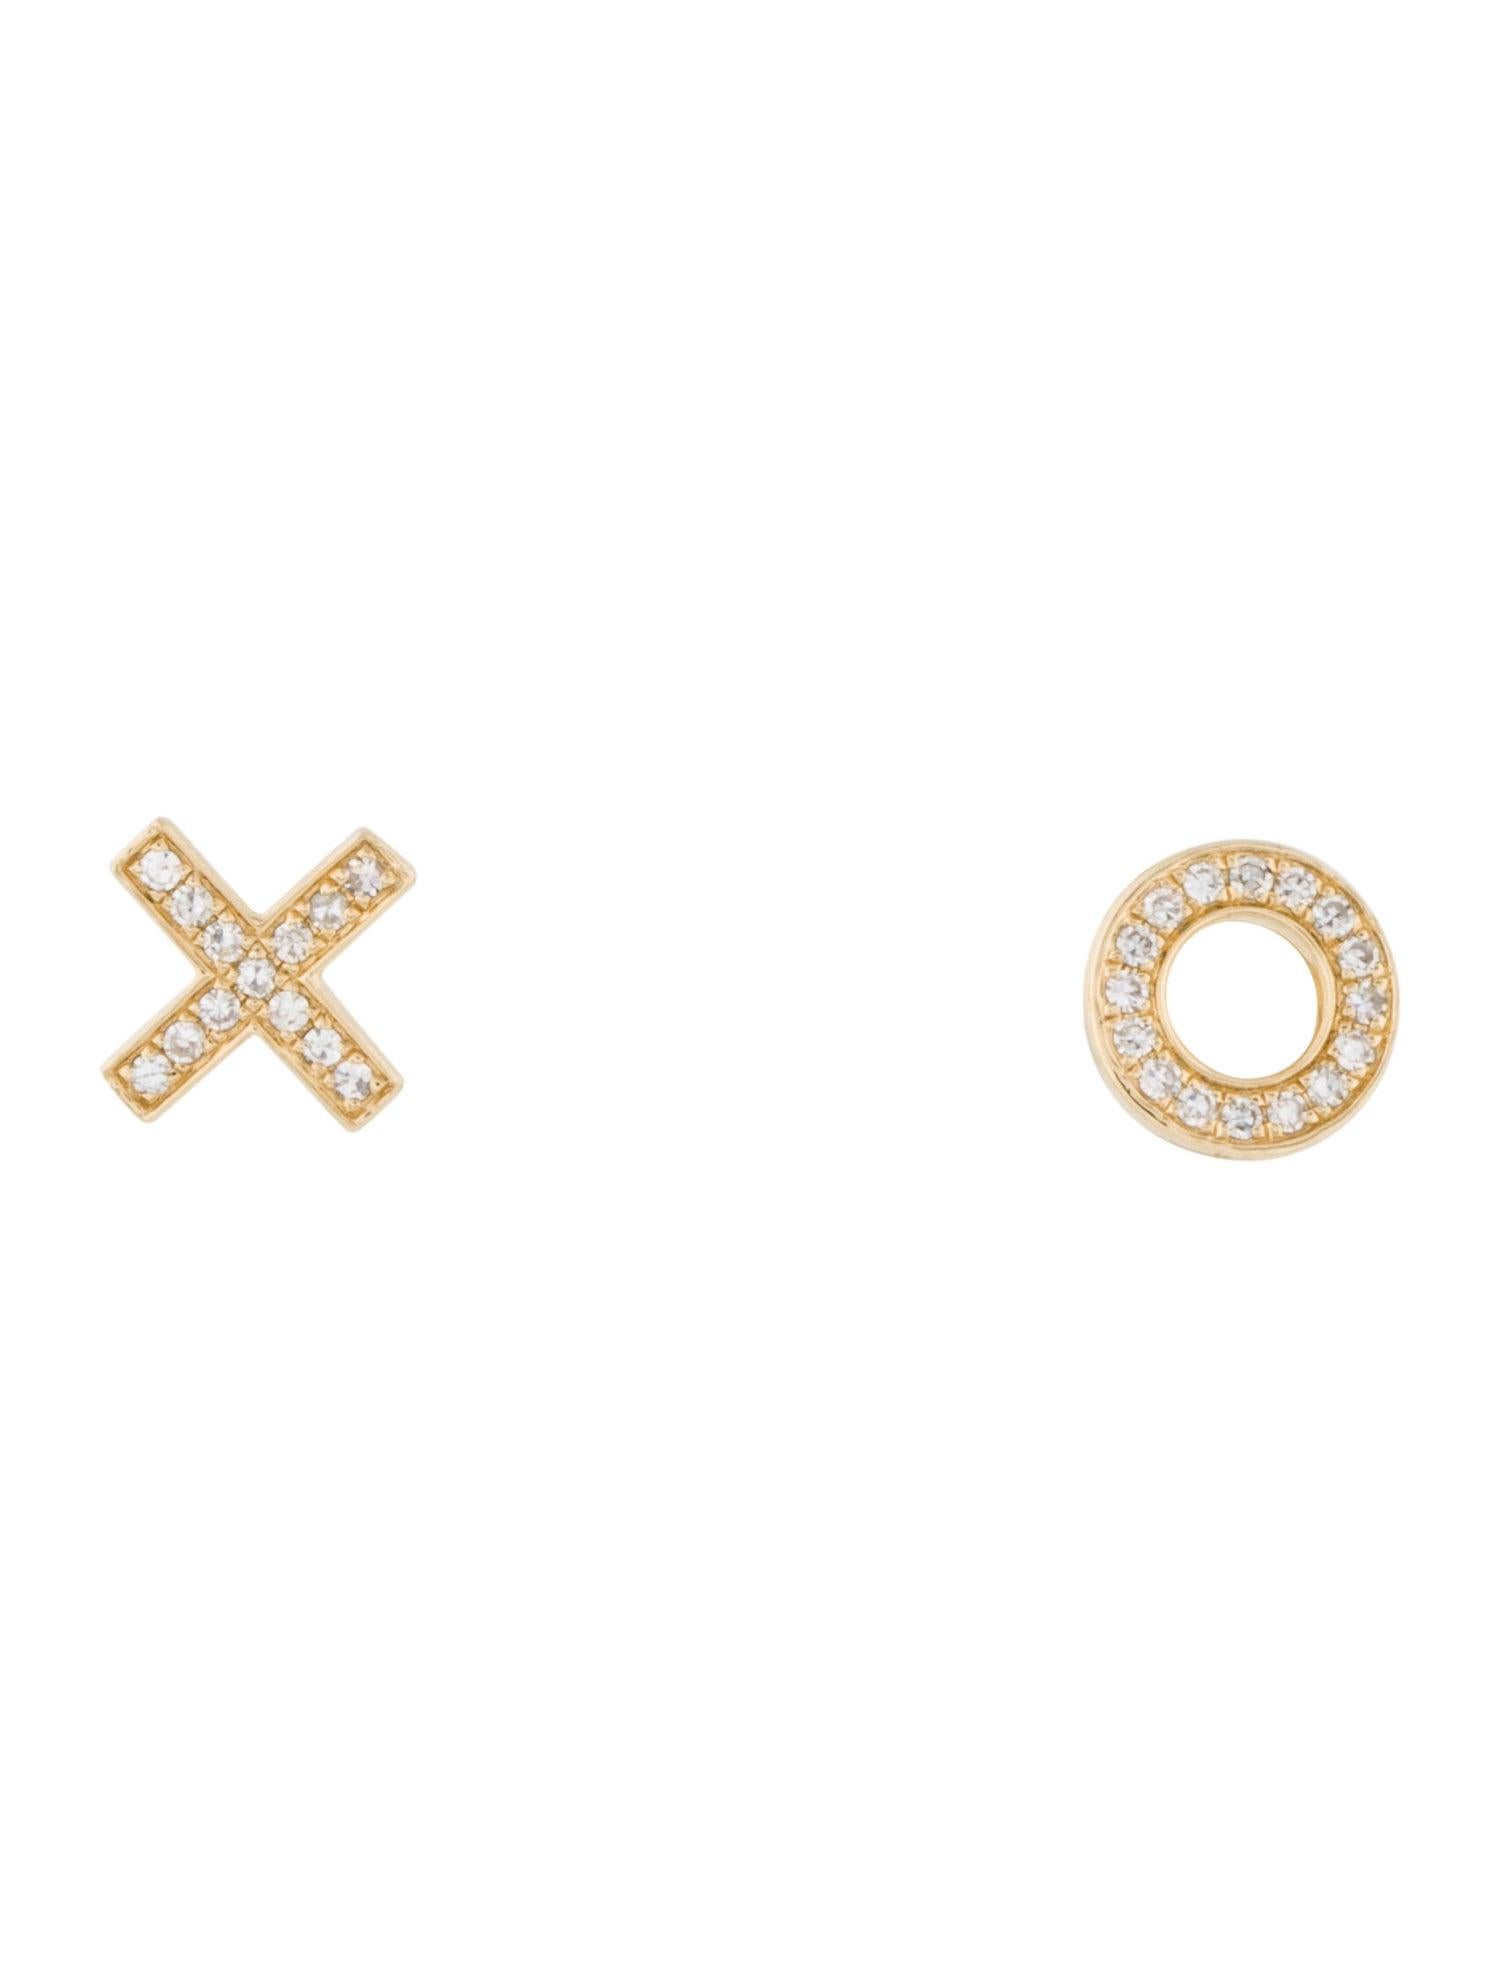 XO Love Diamond Stud Earrings: Crafted of real 14k gold, these popular XO Love Diamond Stud shape earrings feature 29 natural white sparkling diamonds approximately 0.08 ct. Certified diamonds. Diamond Color & Clarity GH-SI1 Measures approximately